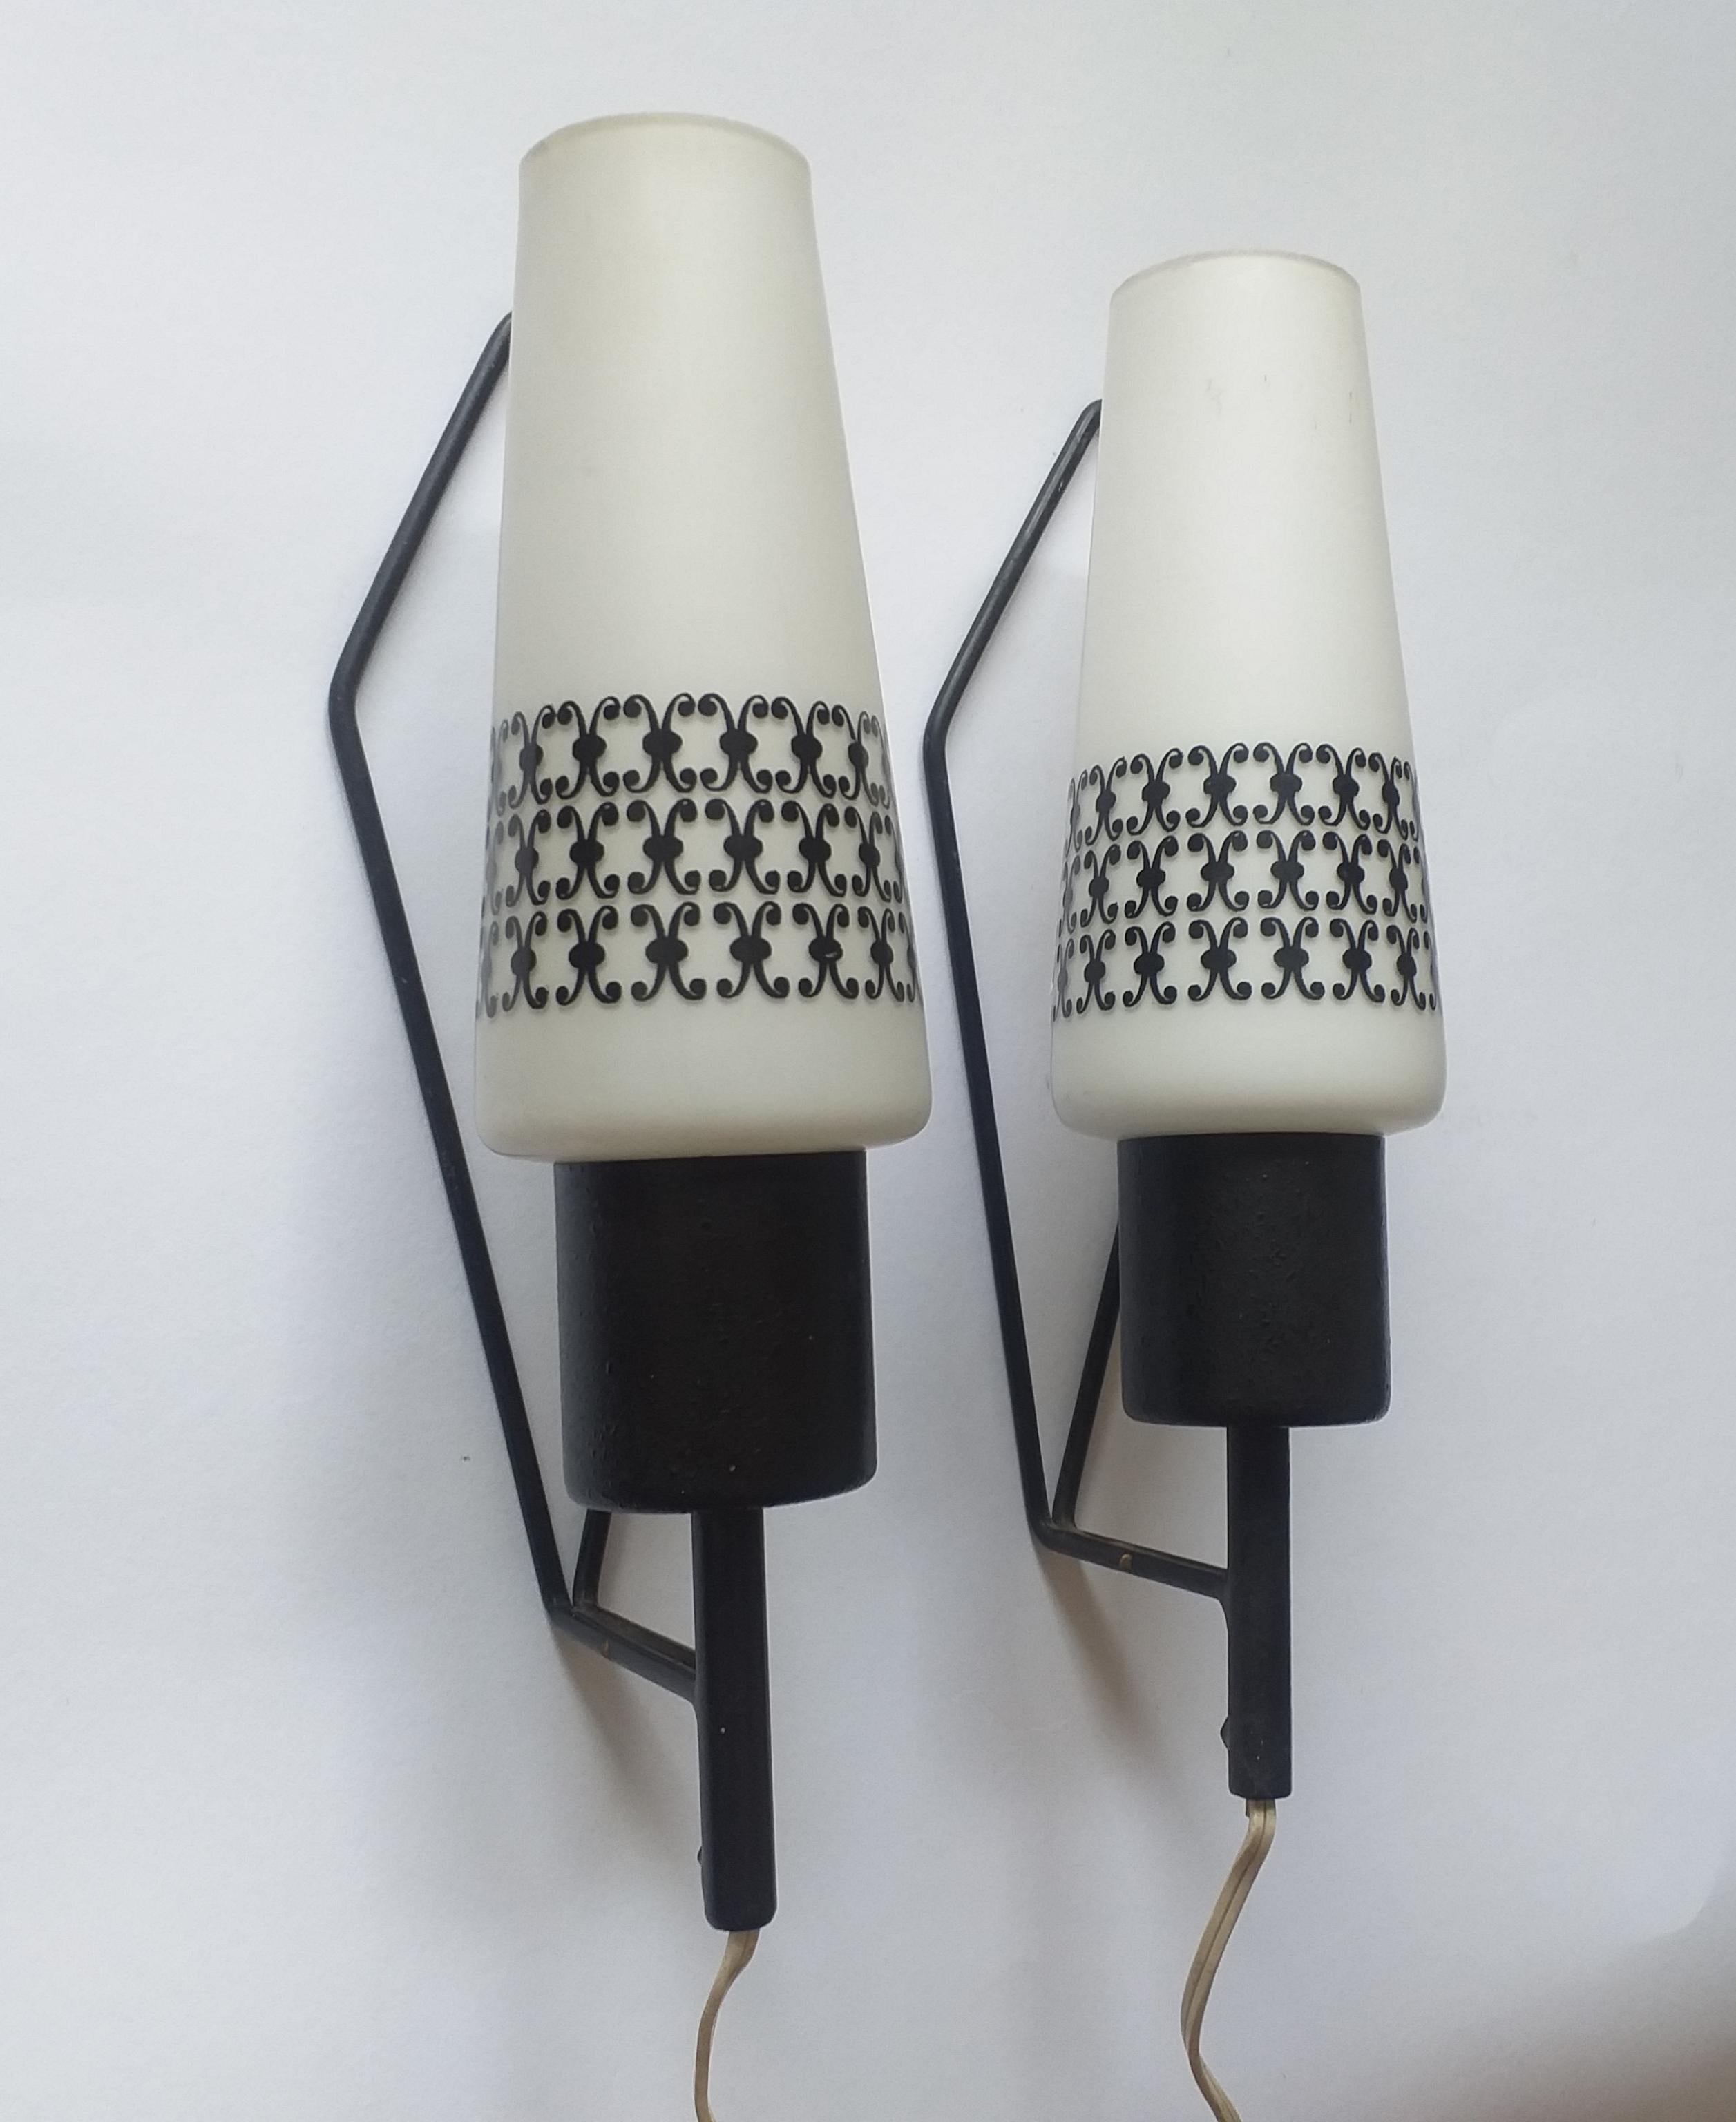 Pair of Midcentury Wall Lamps, 1960s For Sale 1